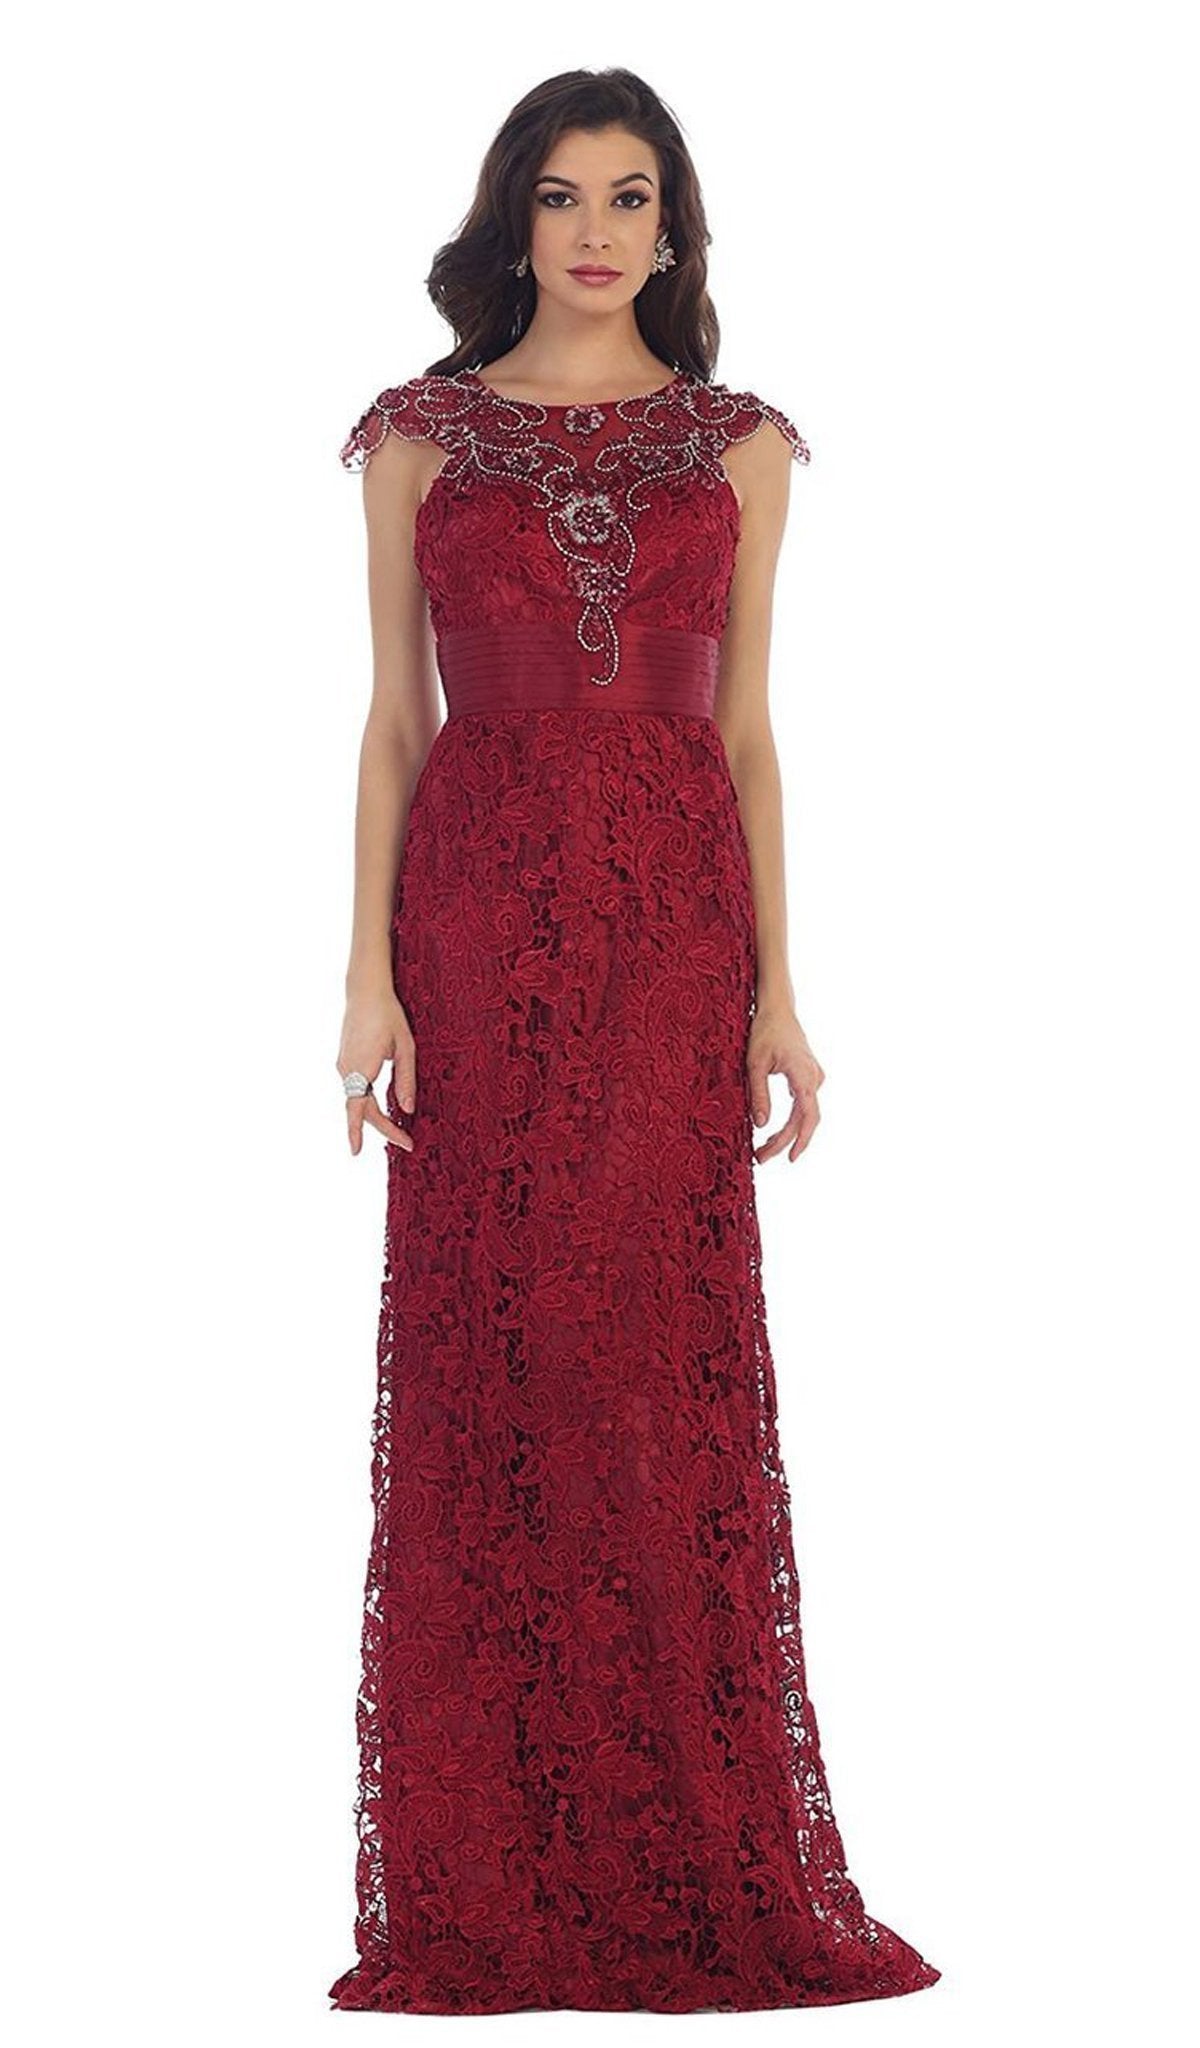 May Queen - RQ7182 Rhinestone Lace Floral Evening Gown Special Occasion Dress 6 / Burgundy